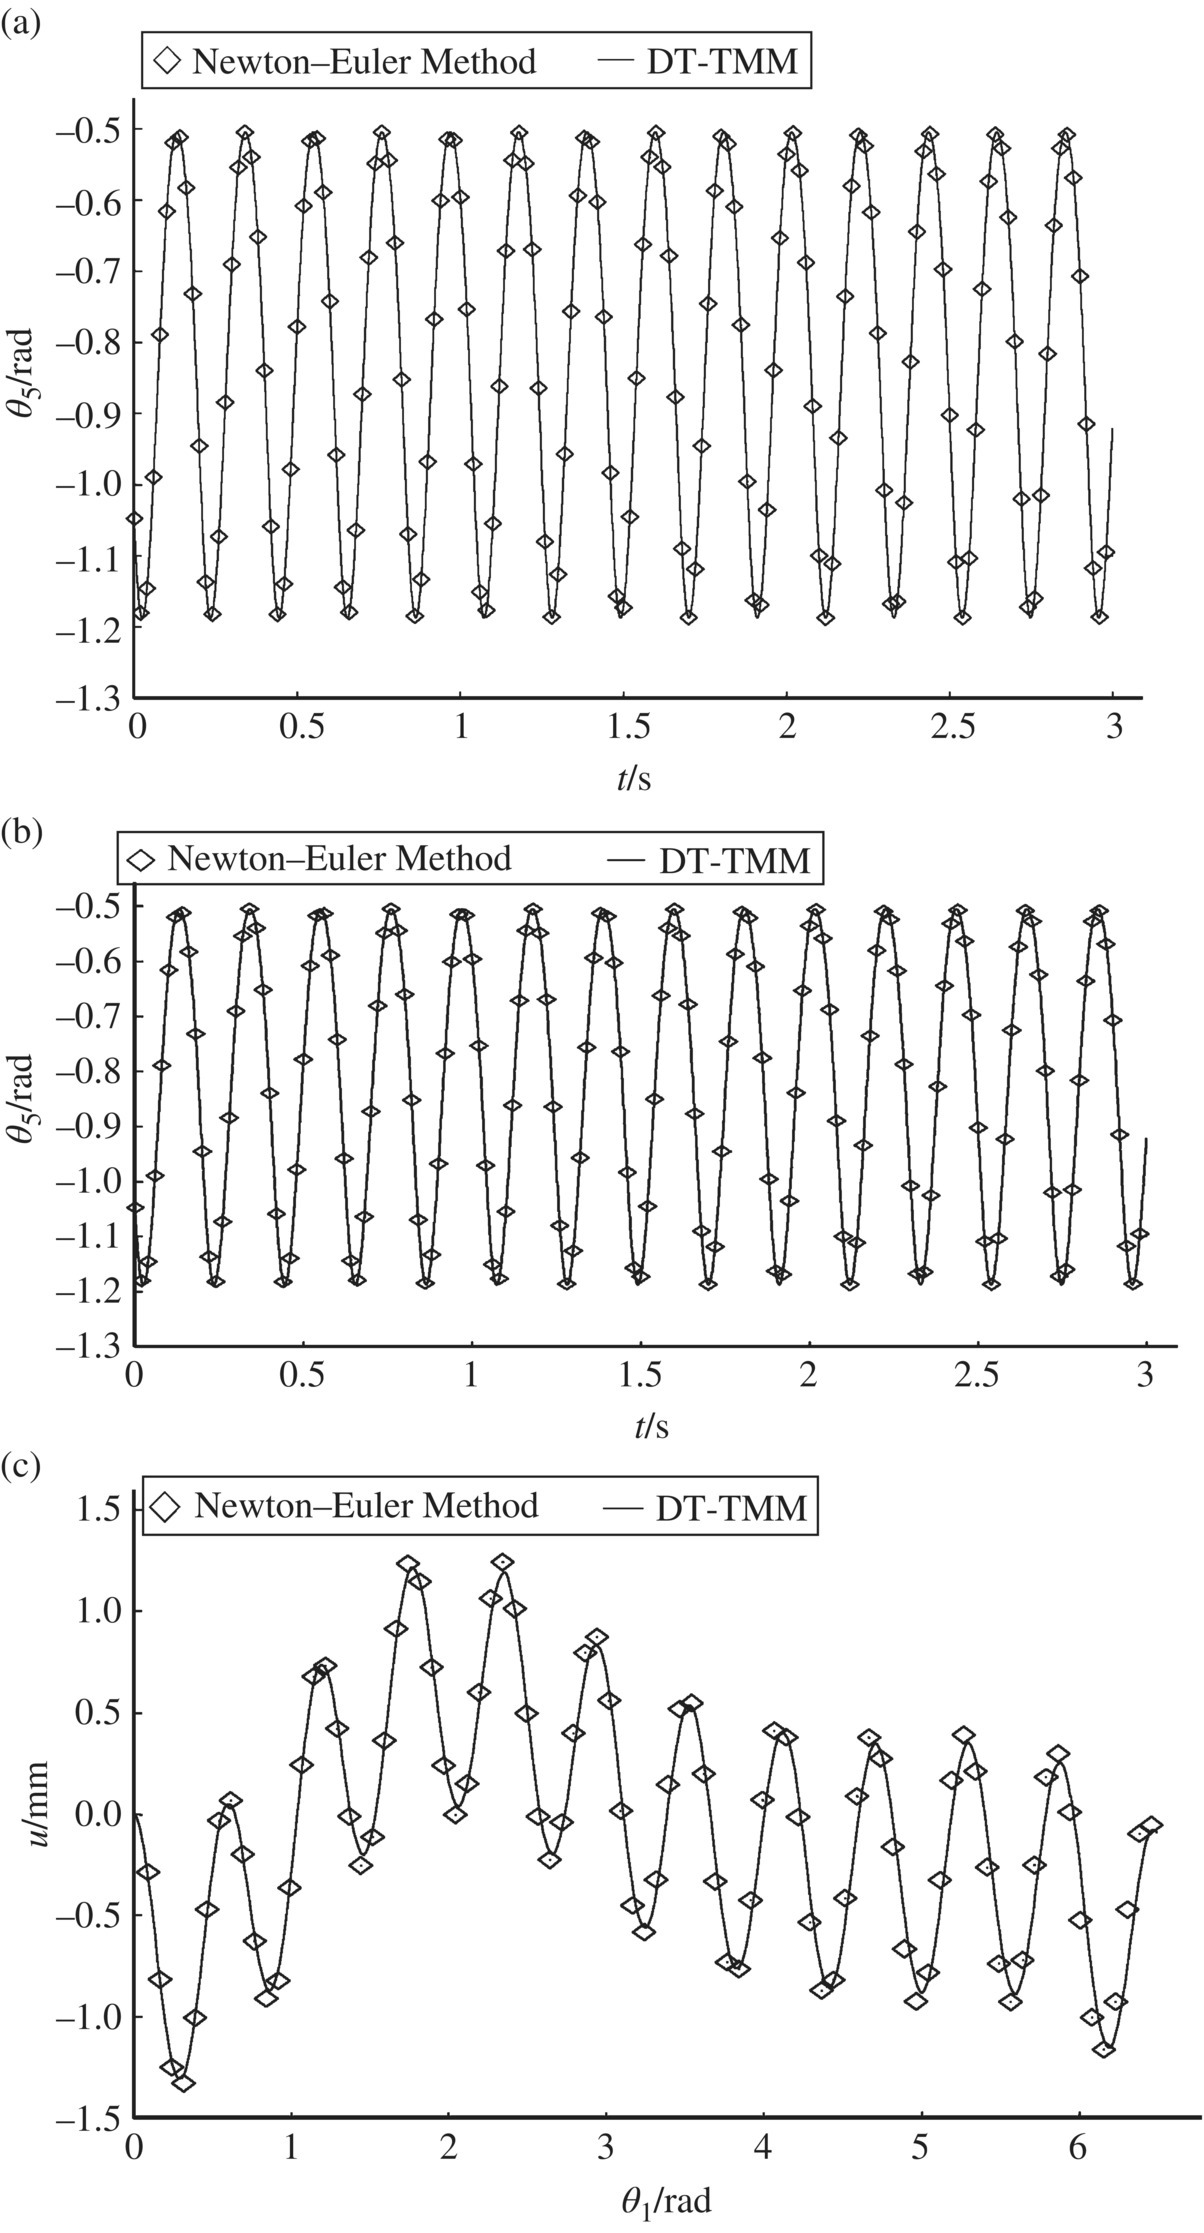 3 Graphs of orientation angle of rigid body 5 (top) and beam 4 (middle) and deformation in the mid-point of the beam 4 (bottom), each with 2 coinciding waves for DT-TMM (solid) and Newton–Euler method (diamond).